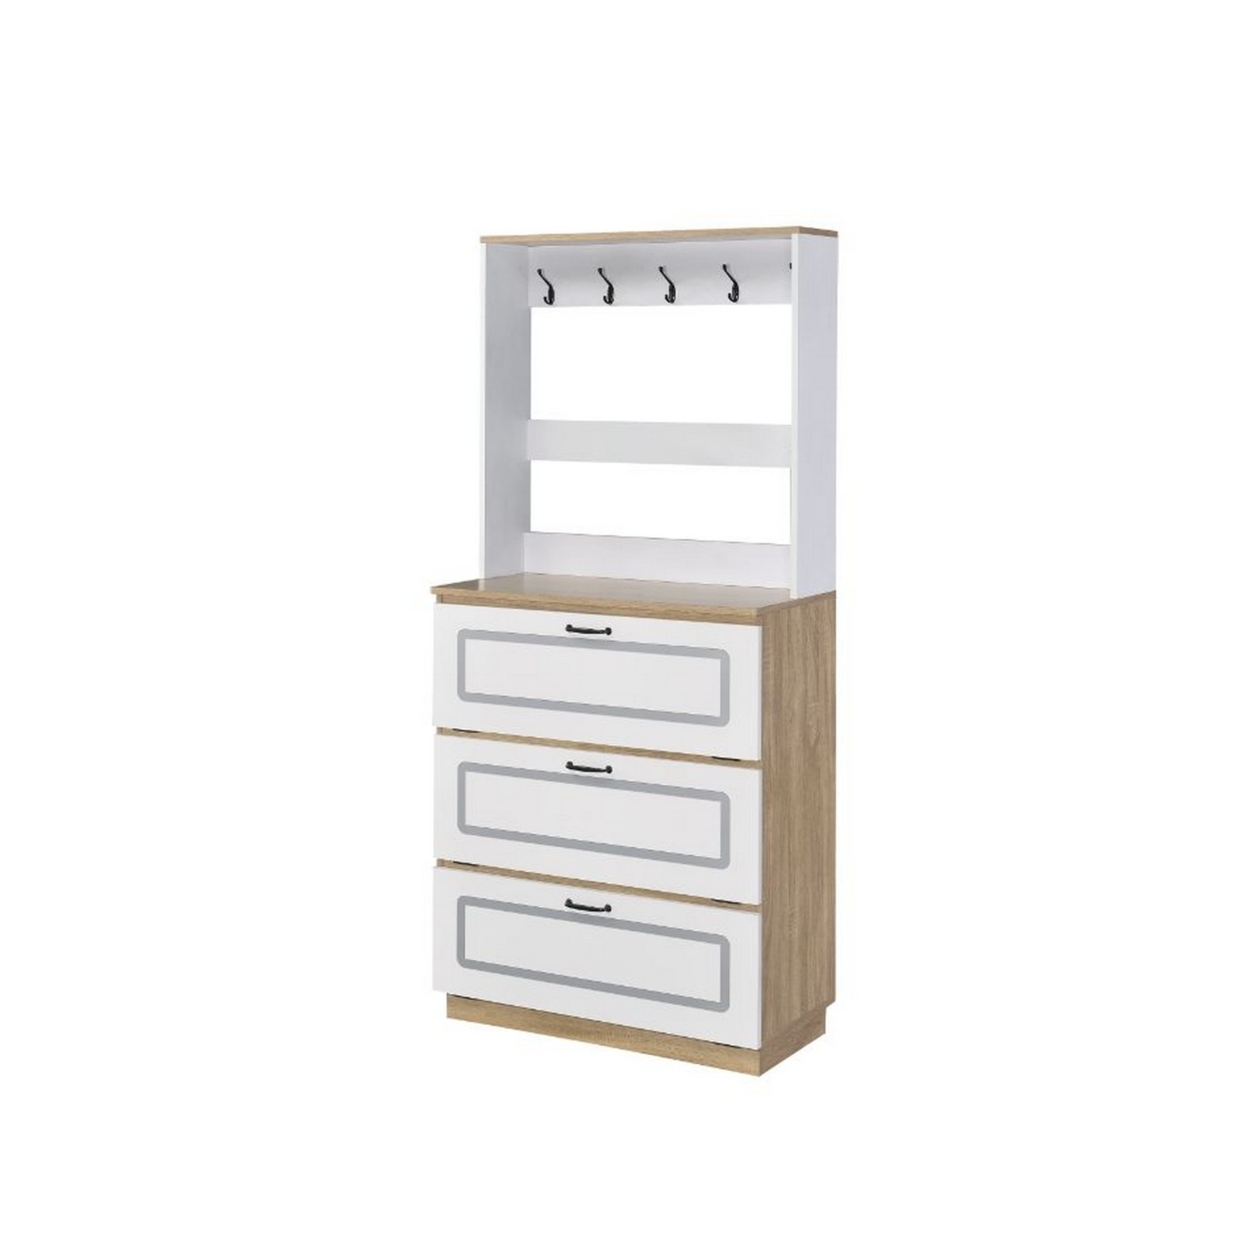 Shoe Cabinet With Storage Drawers And Hooks, White And Brown- Saltoro Sherpi